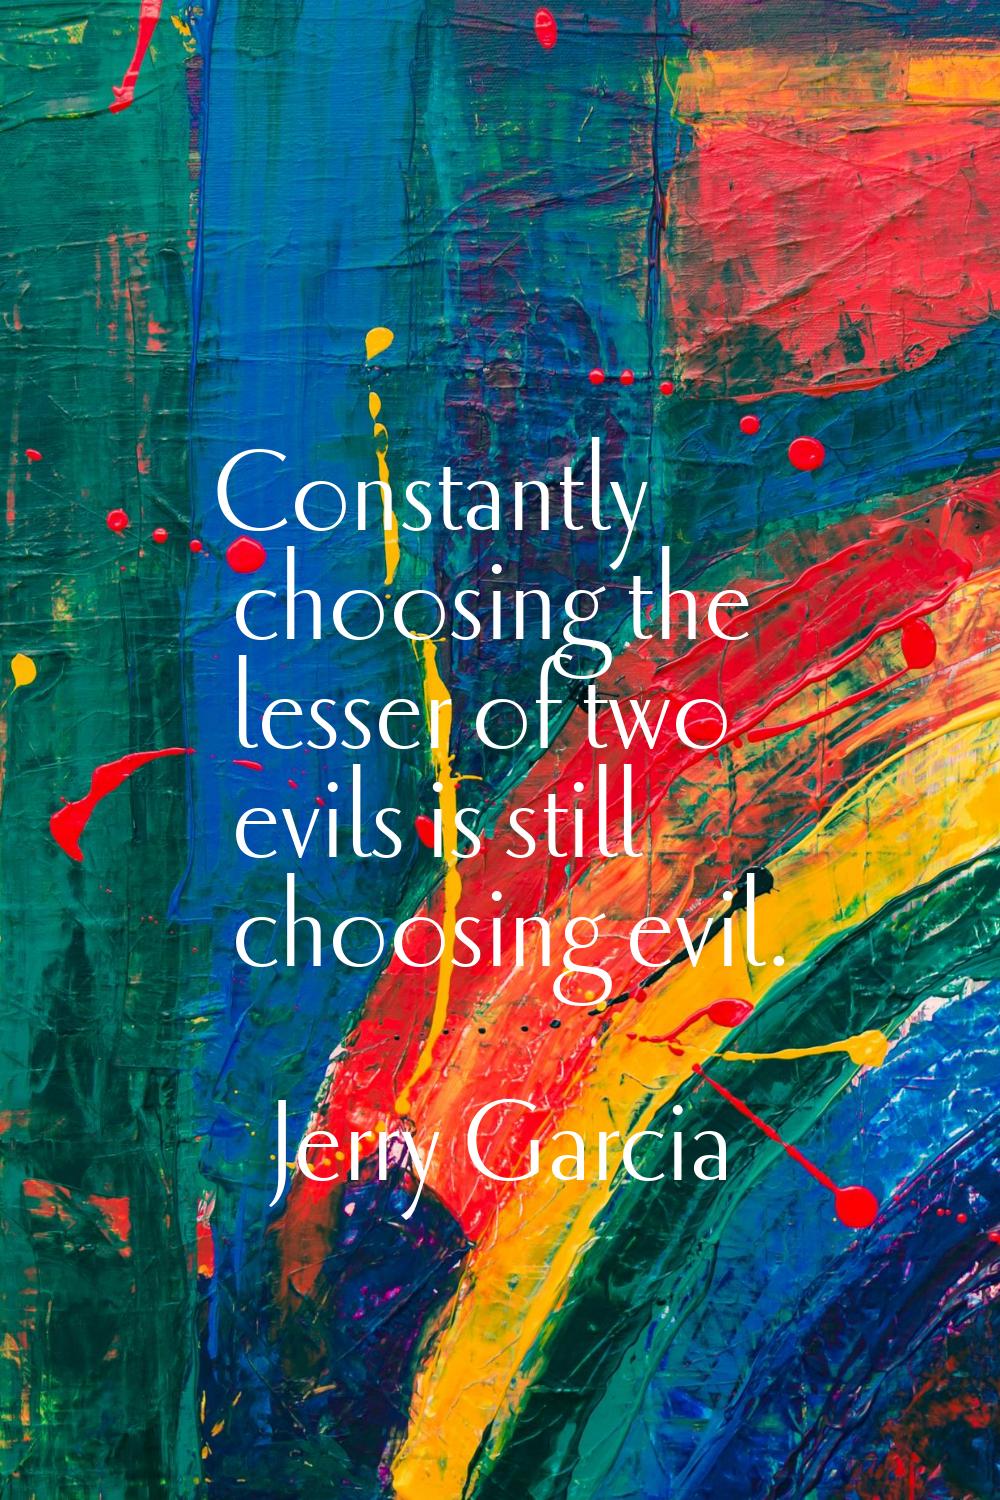 Constantly choosing the lesser of two evils is still choosing evil.